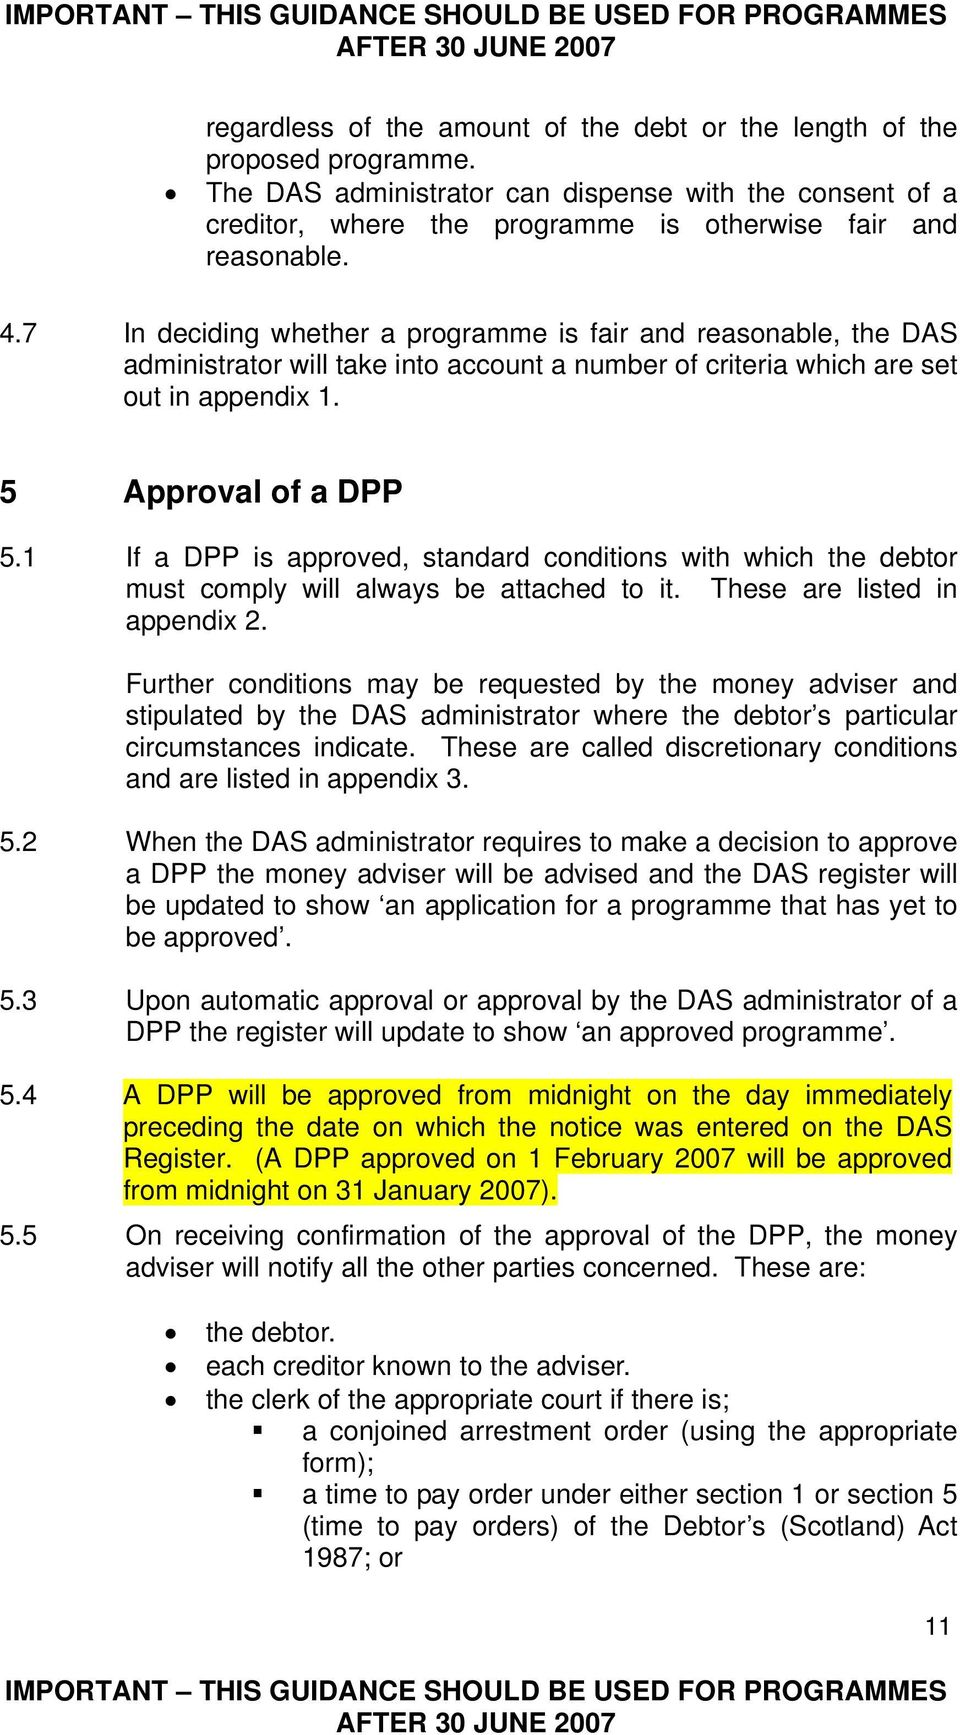 1 If a DPP is approved, standard conditions with which the debtor must comply will always be attached to it. These are listed in appendix 2.